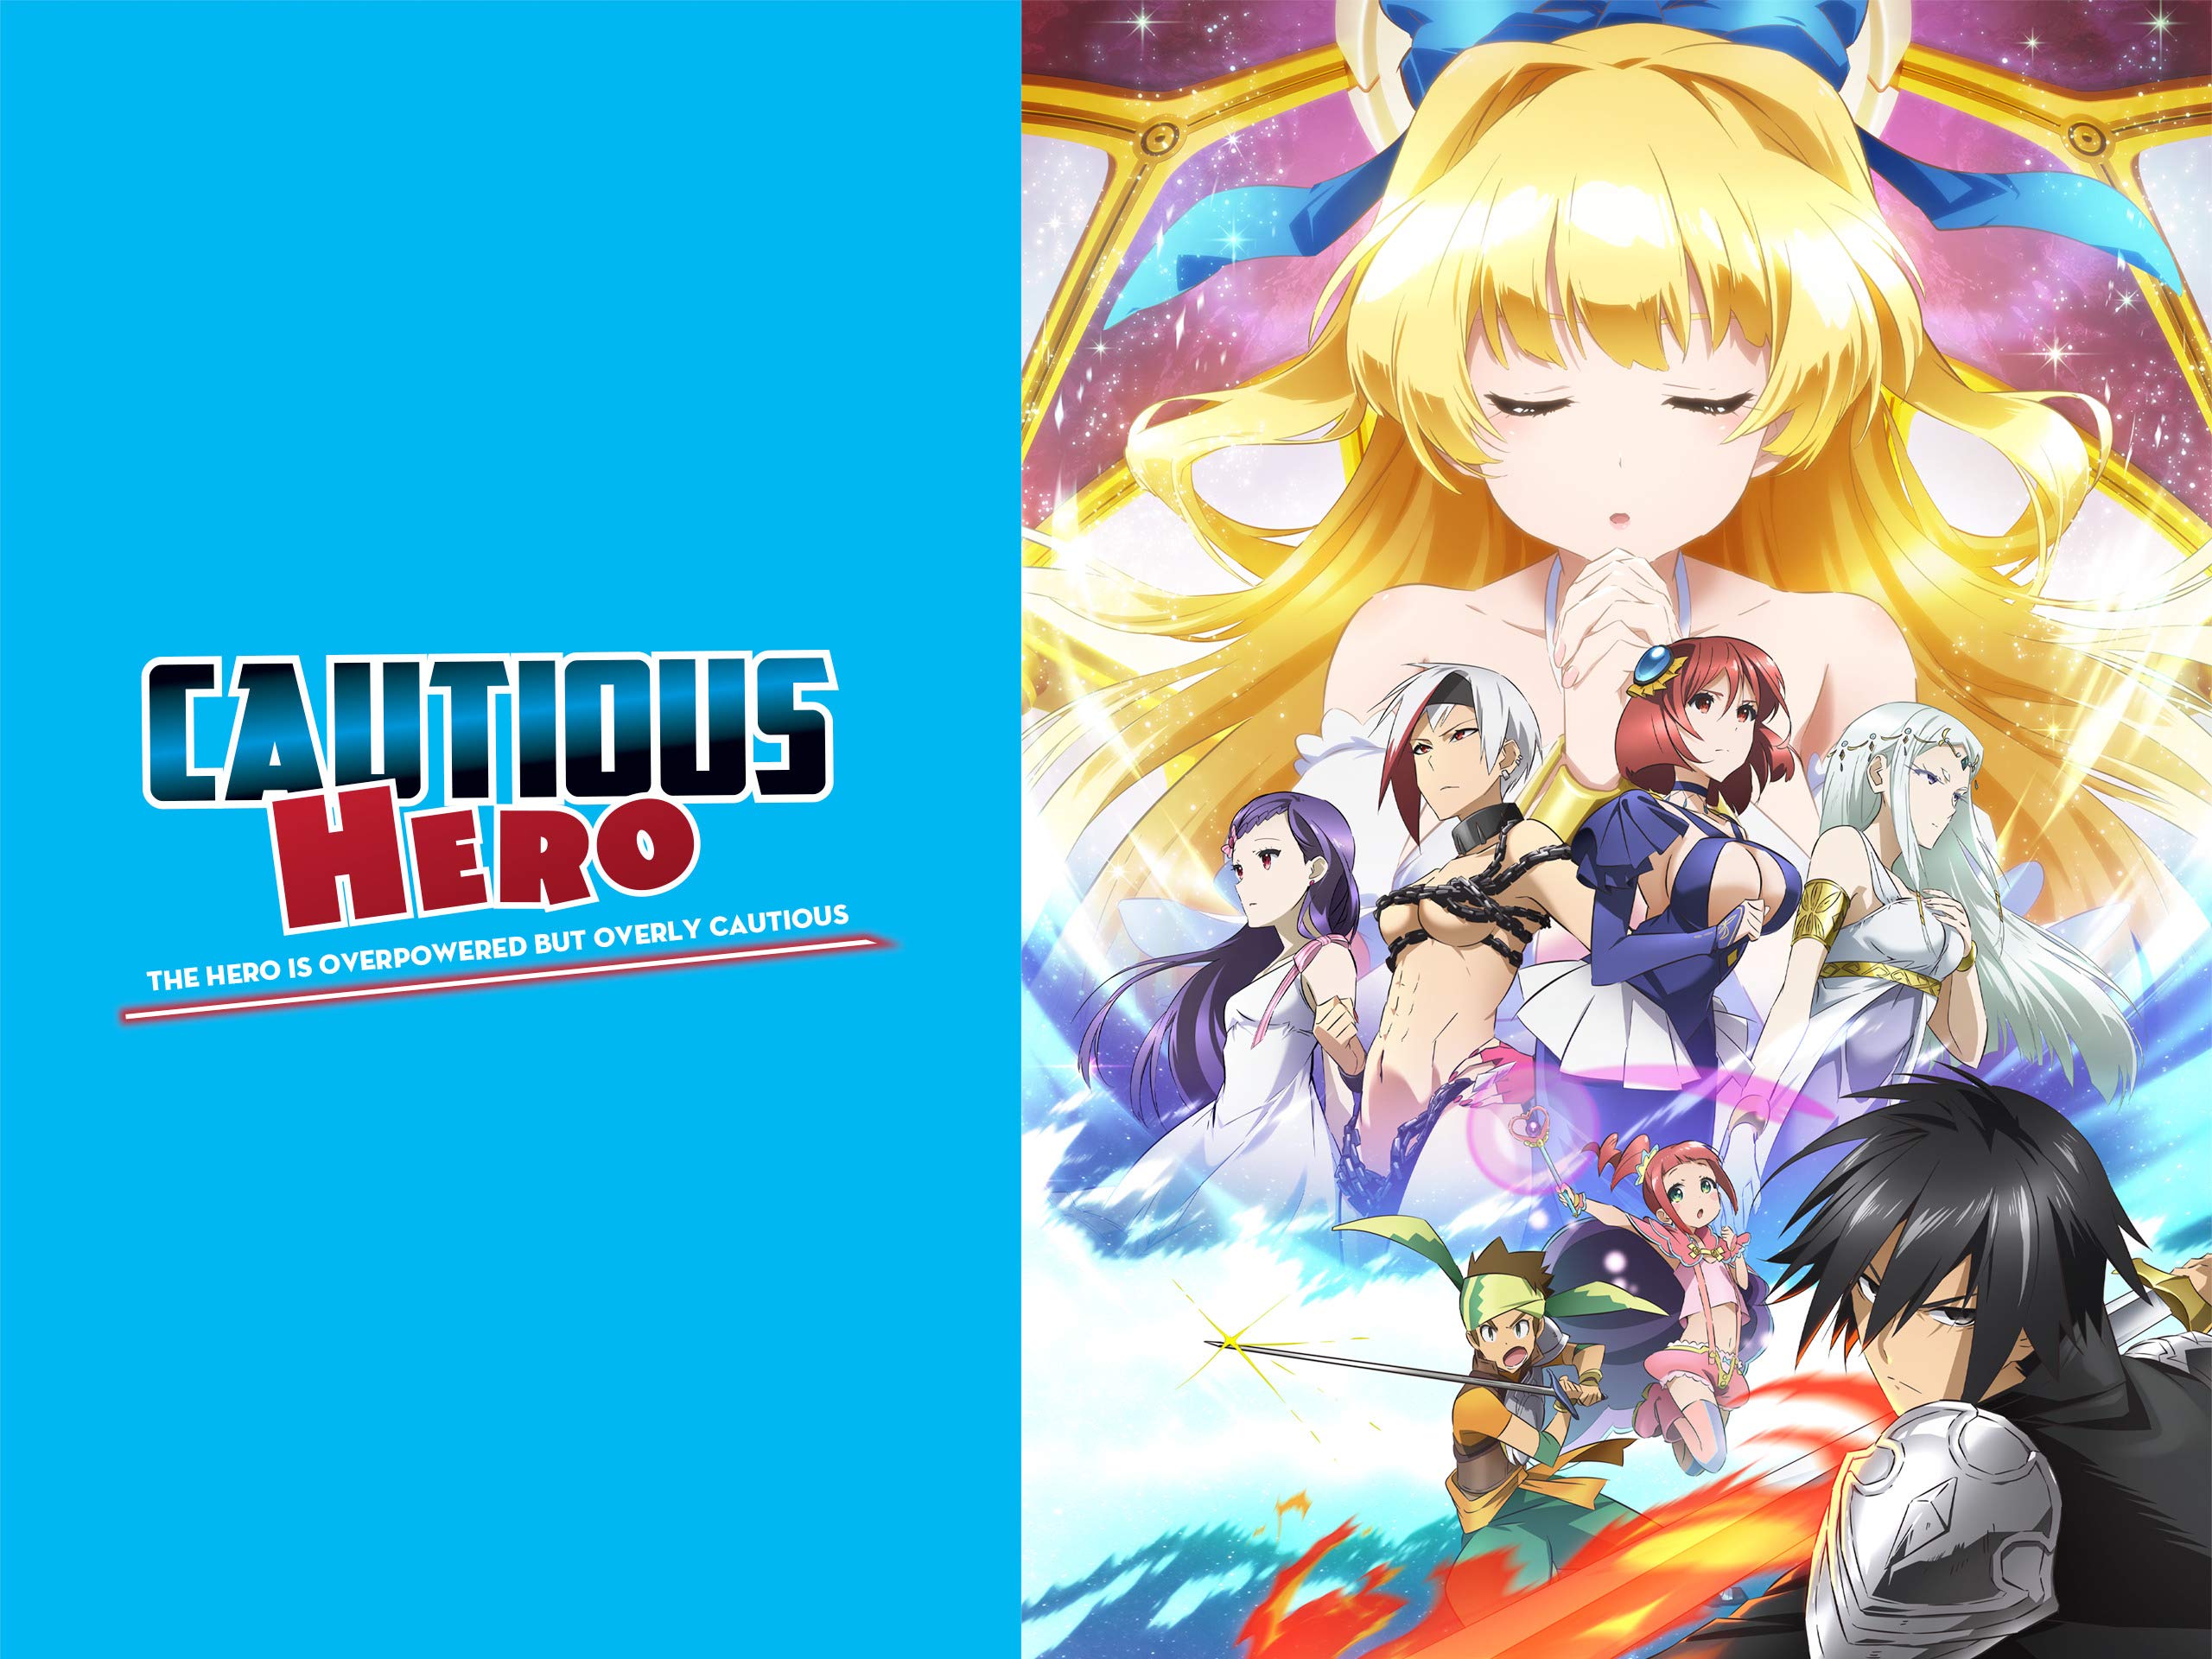 Cautious Hero: The Hero is Overpowered but